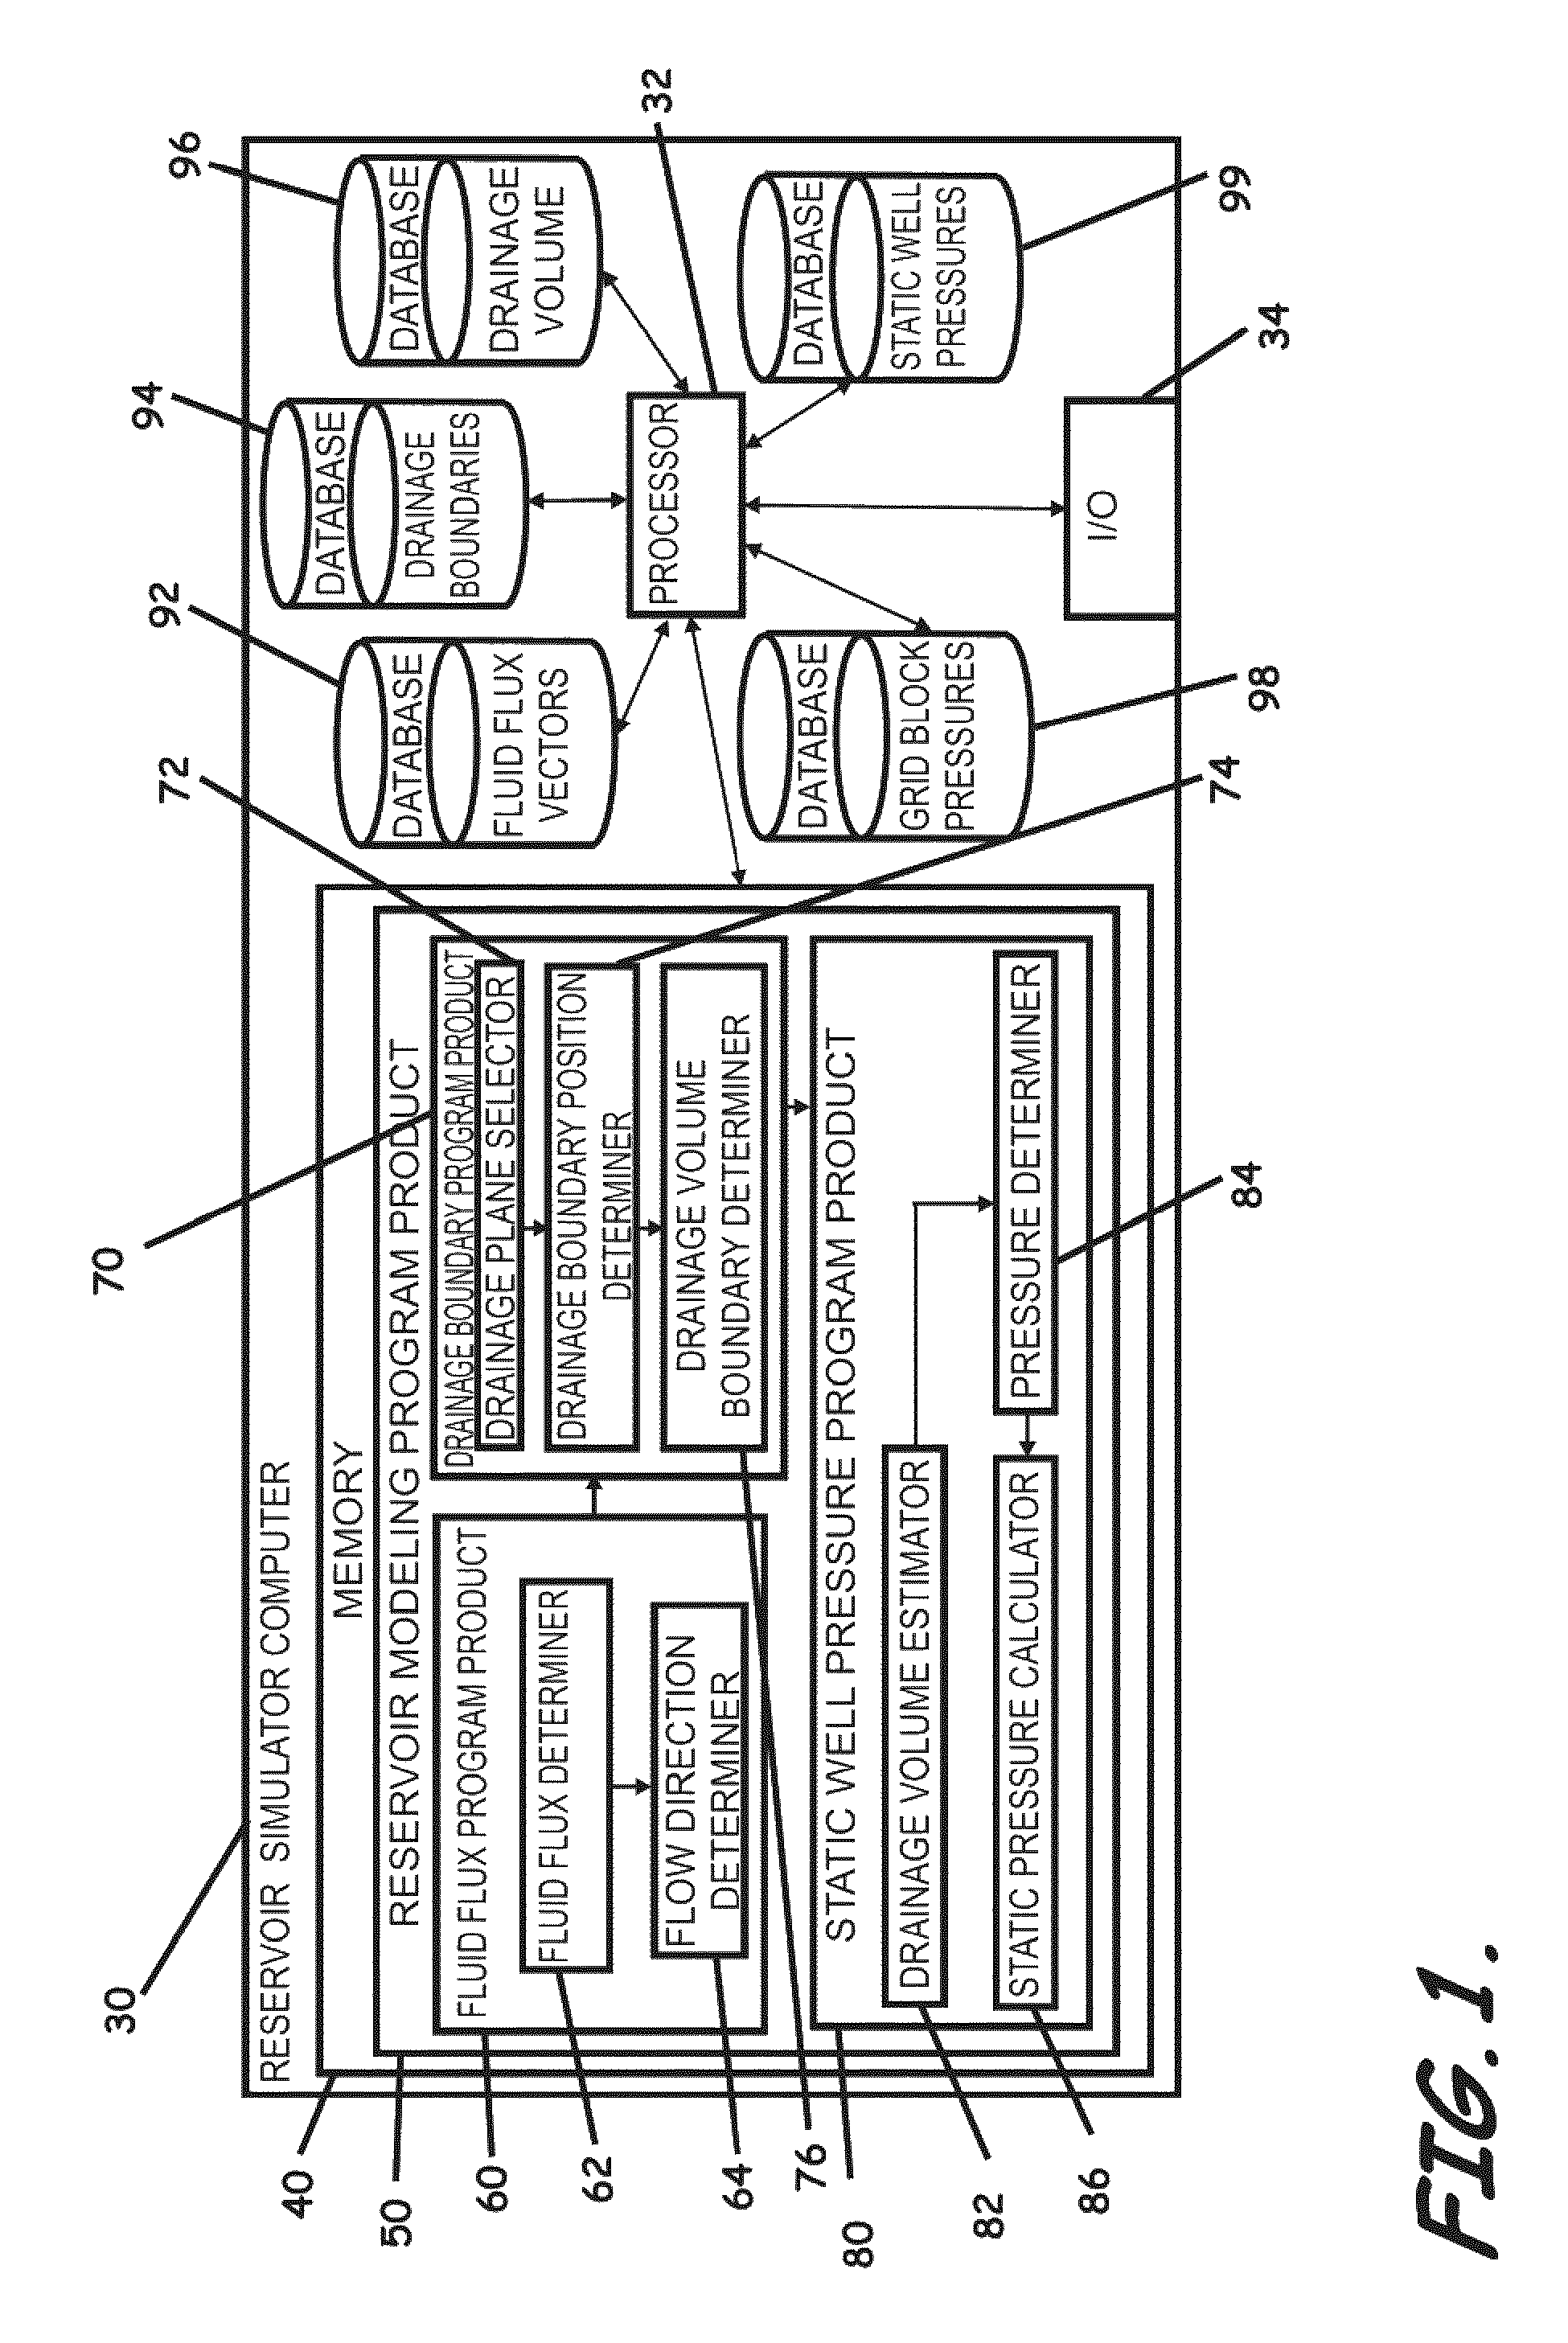 Systems, computer implemented methods, and computer readable program products to compute approximate well drainage pressure for a reservoir simulator